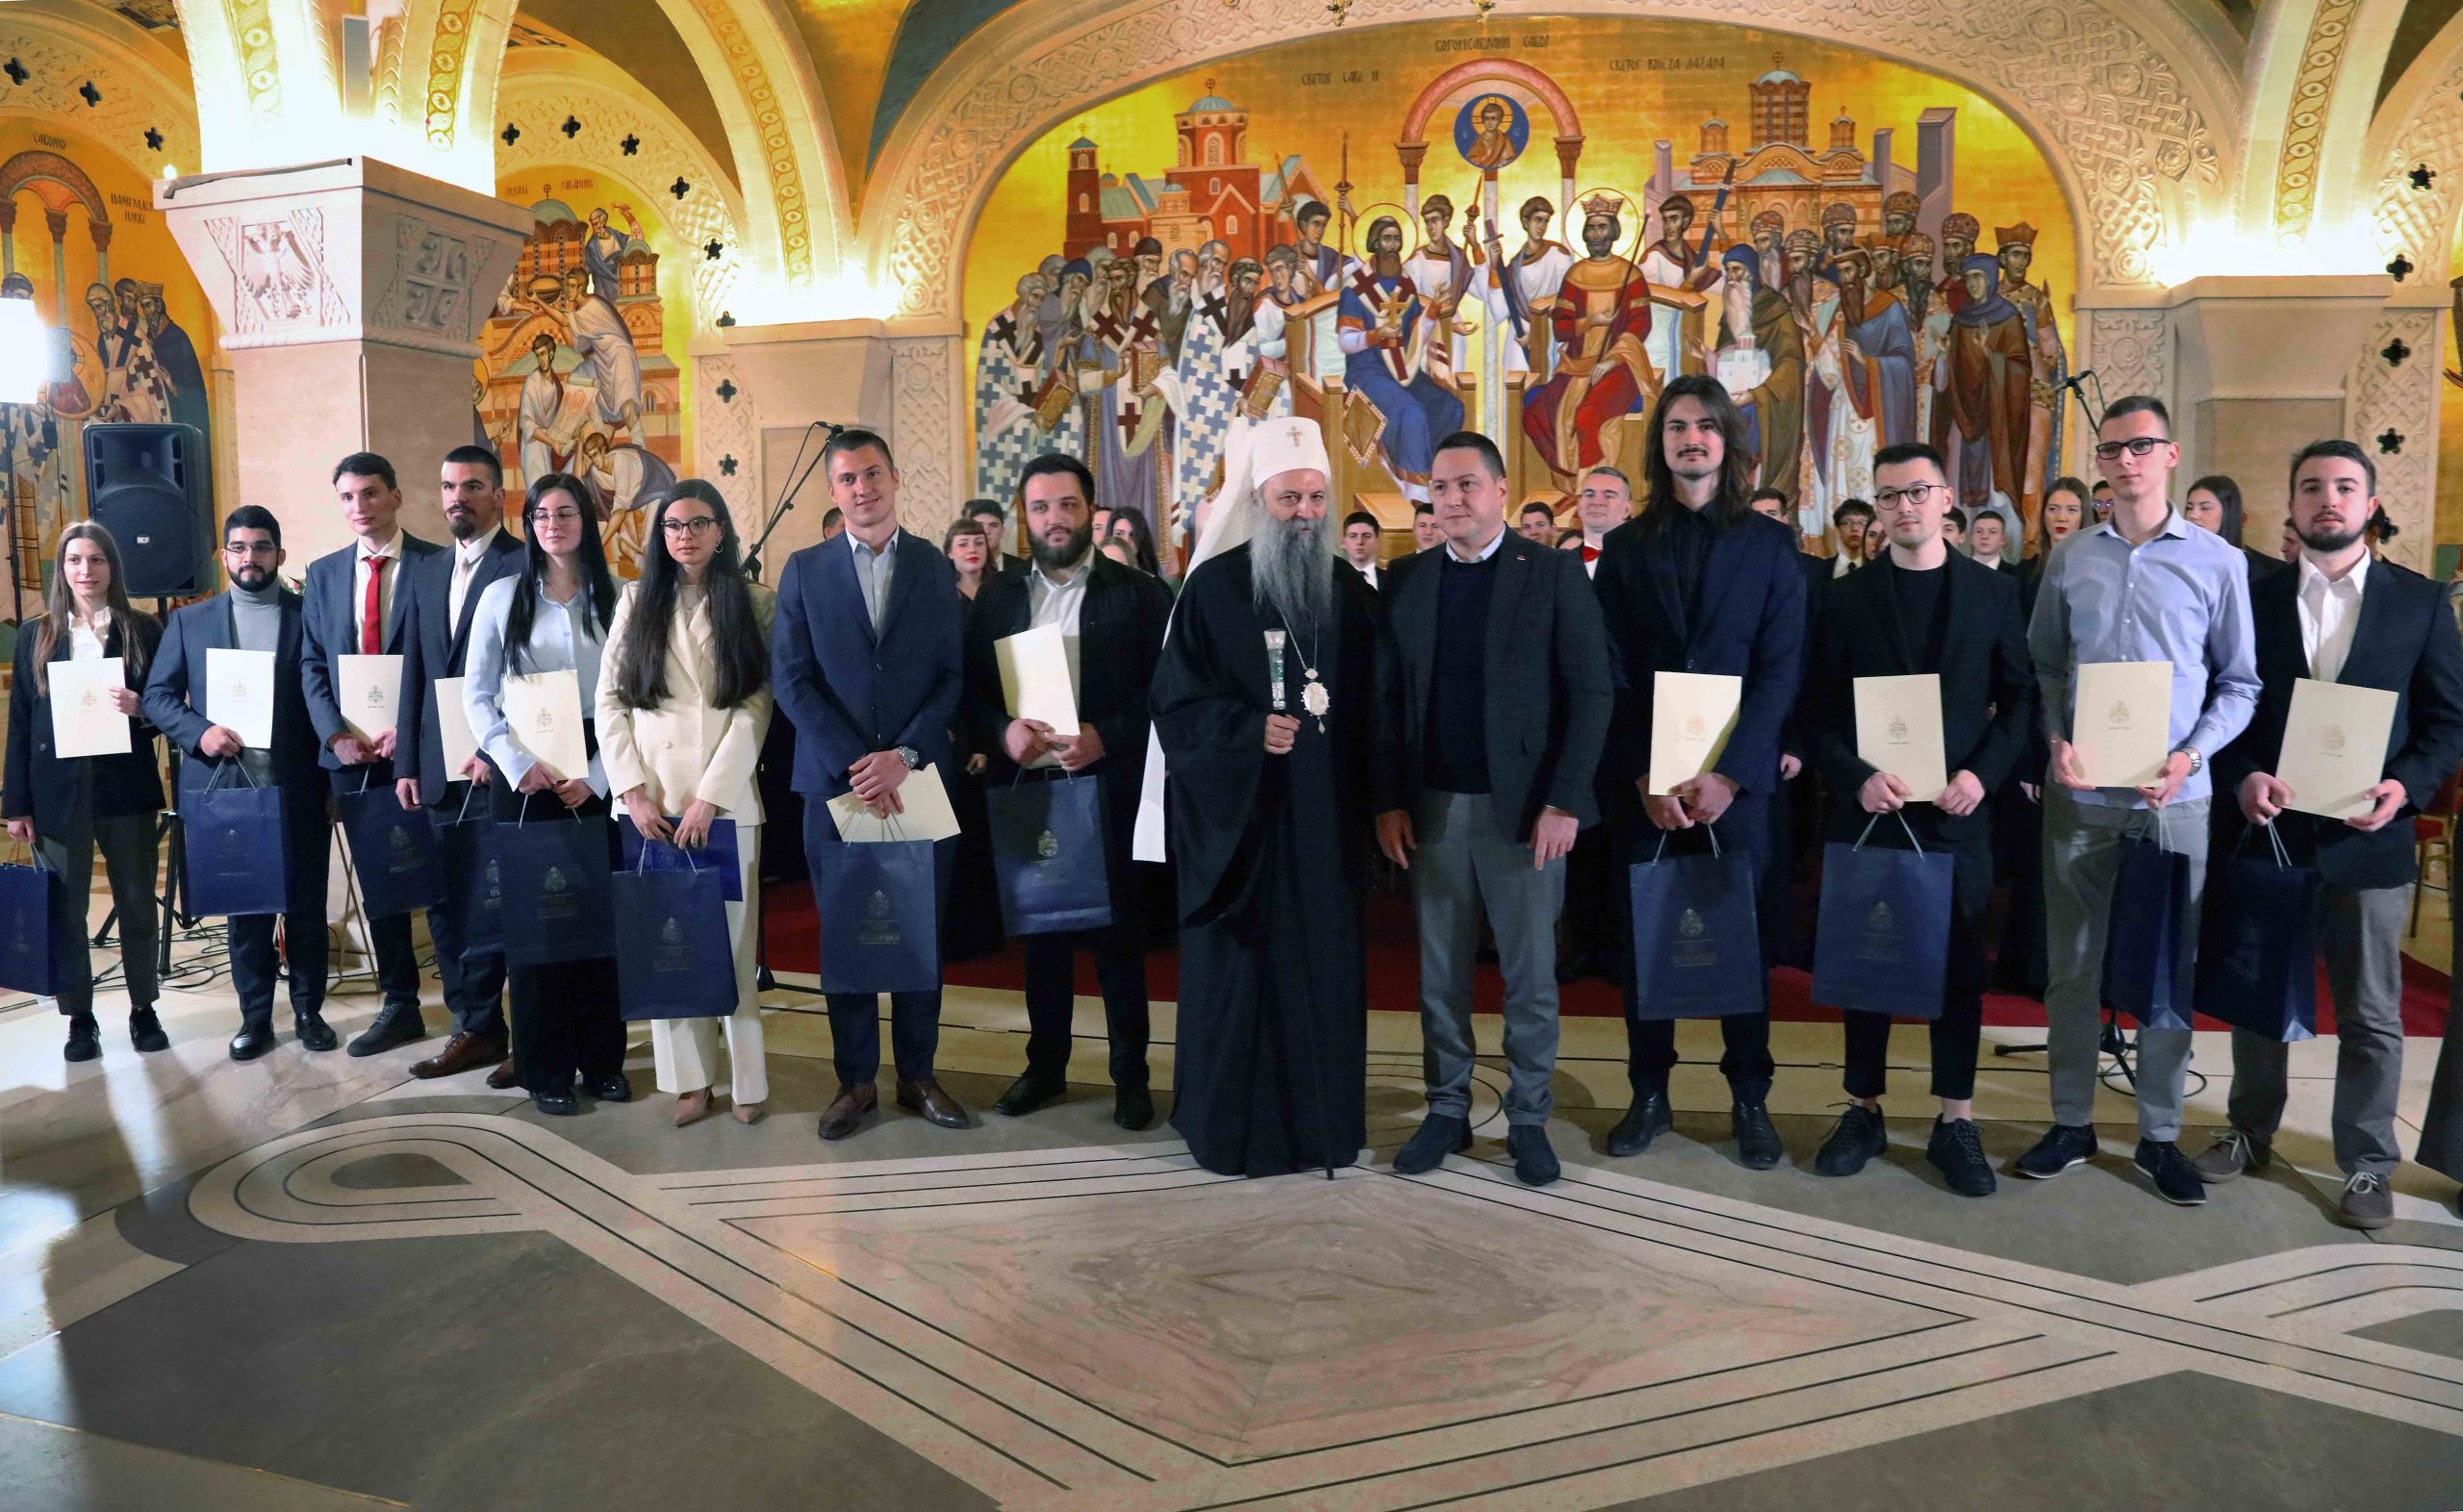 Patriarch Porfirije Awards Annual Scholarships to the Final Year Students of the University of Belgrade